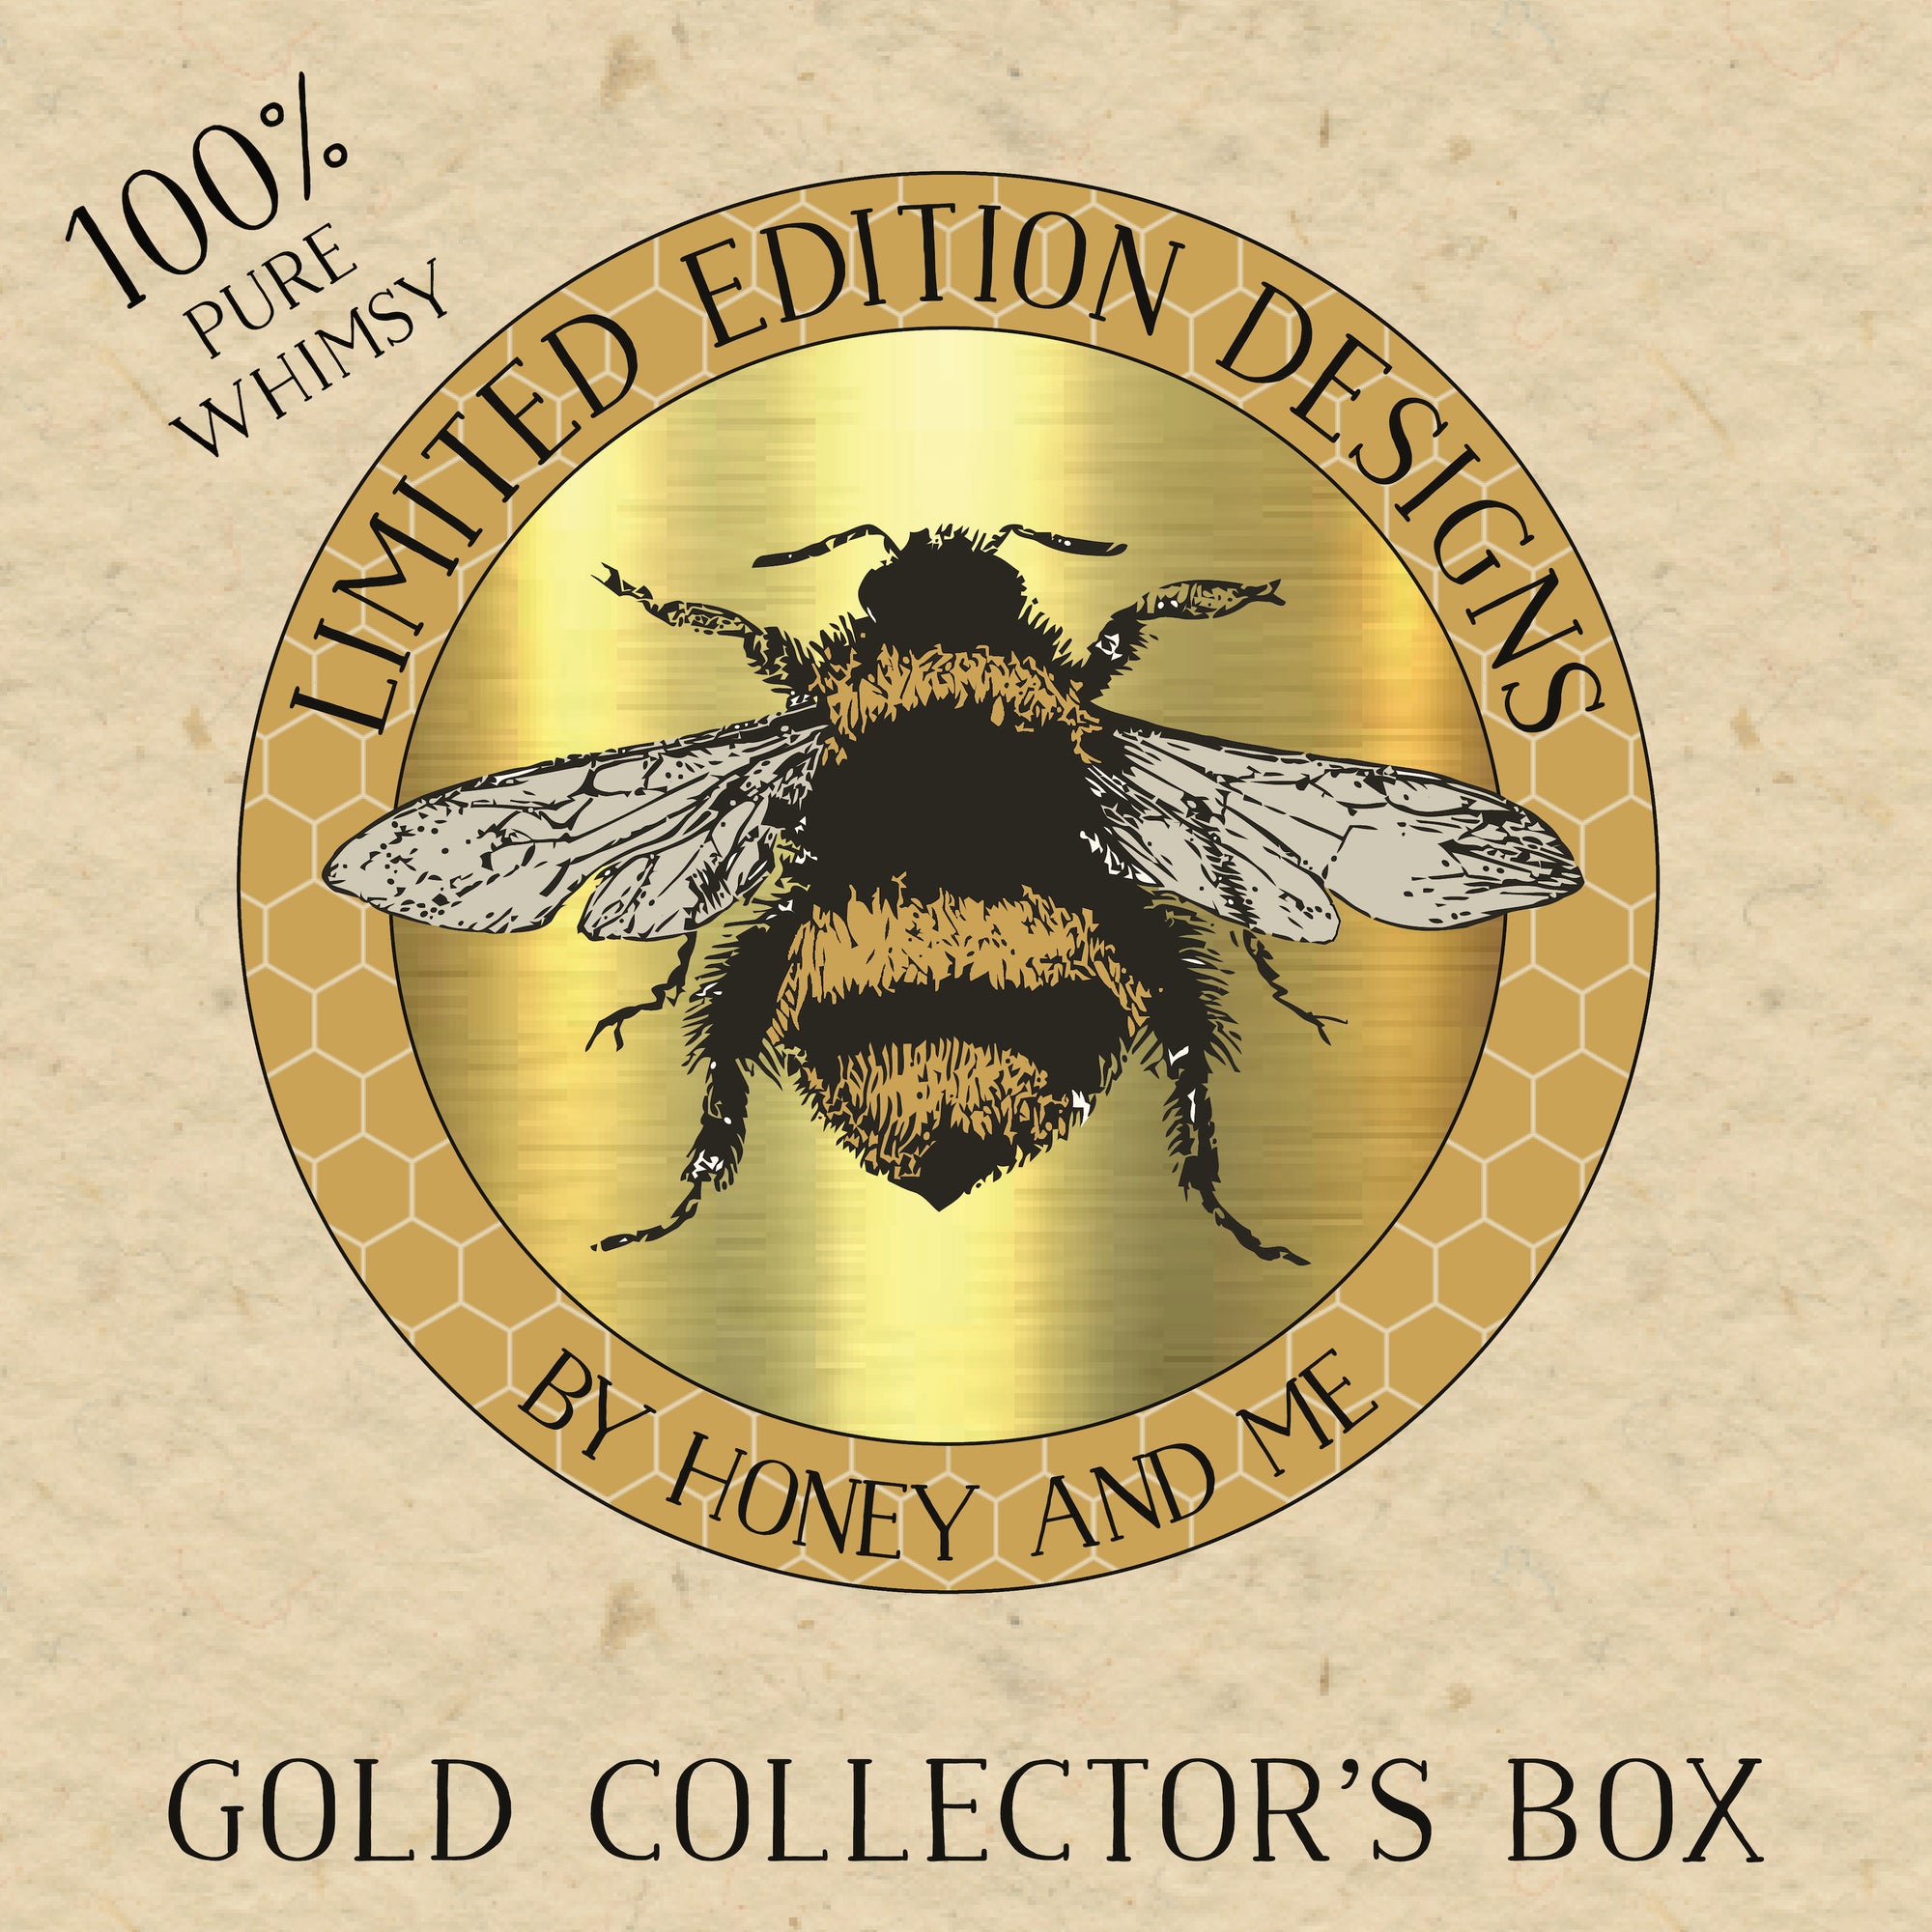 Gold Collector's Quarterly Subscription Box